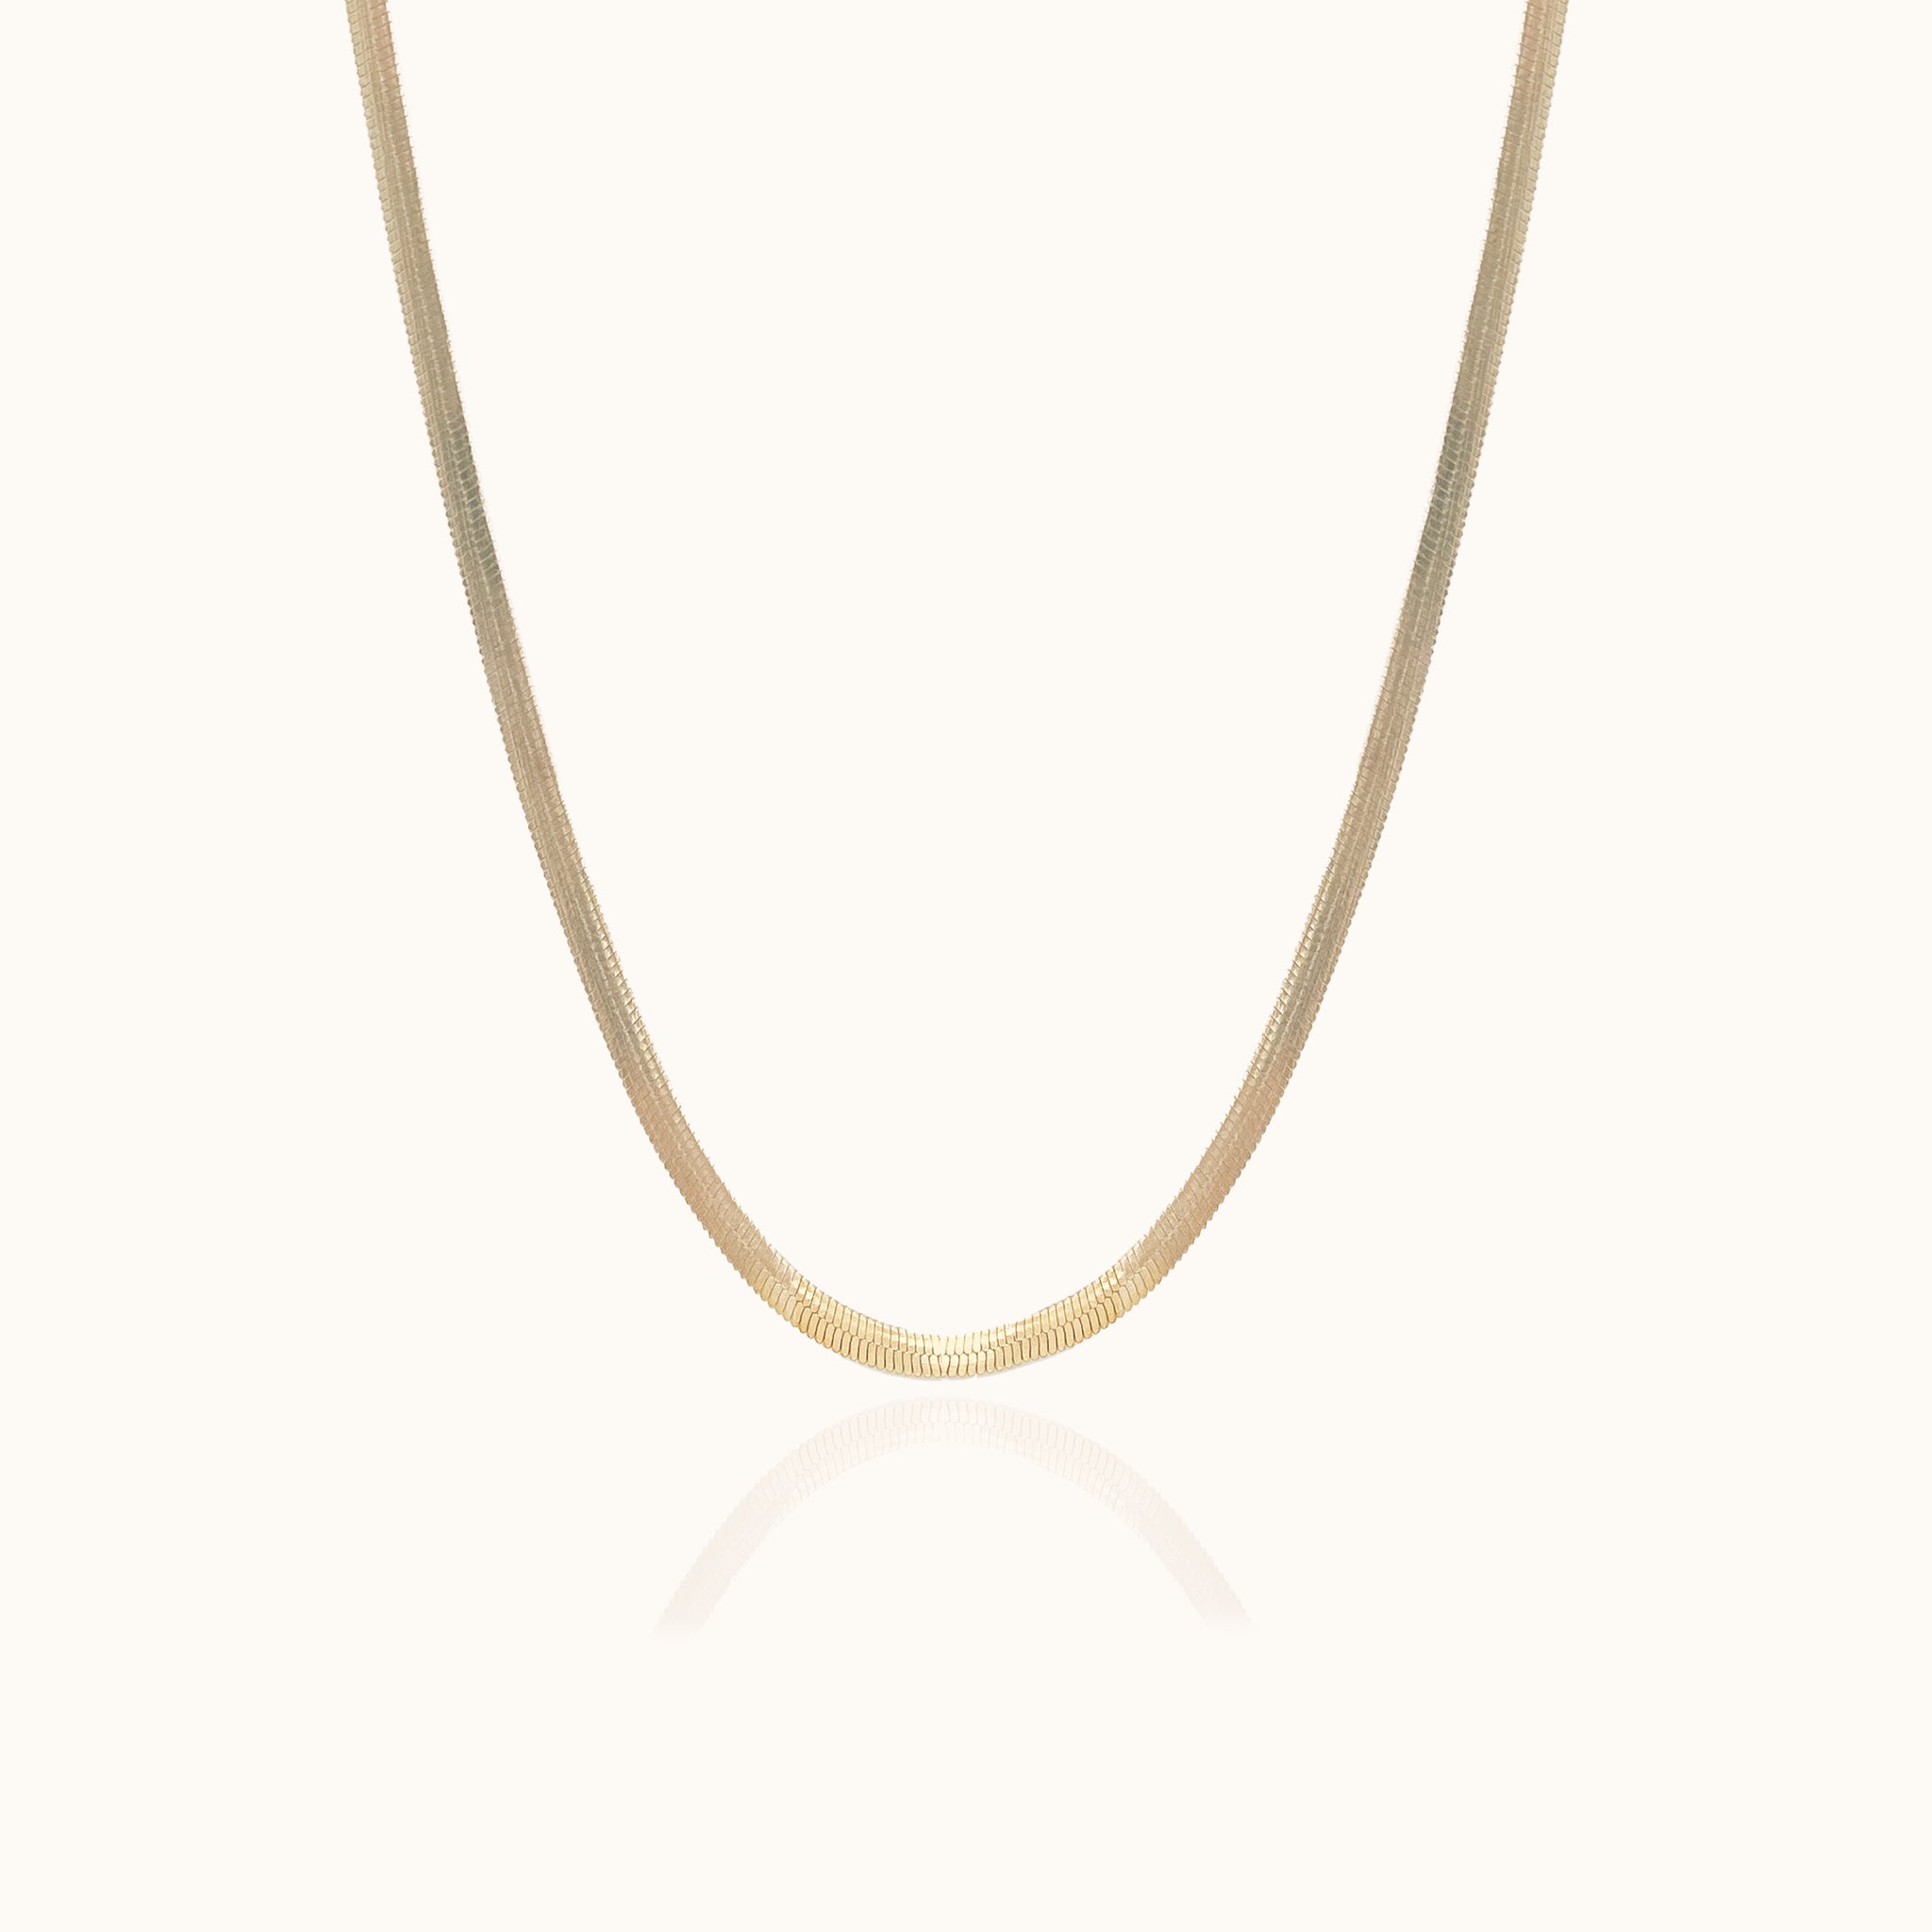 Essential Wide Flat Herringbone Thick Gold Snake Chain Necklace by Doviana